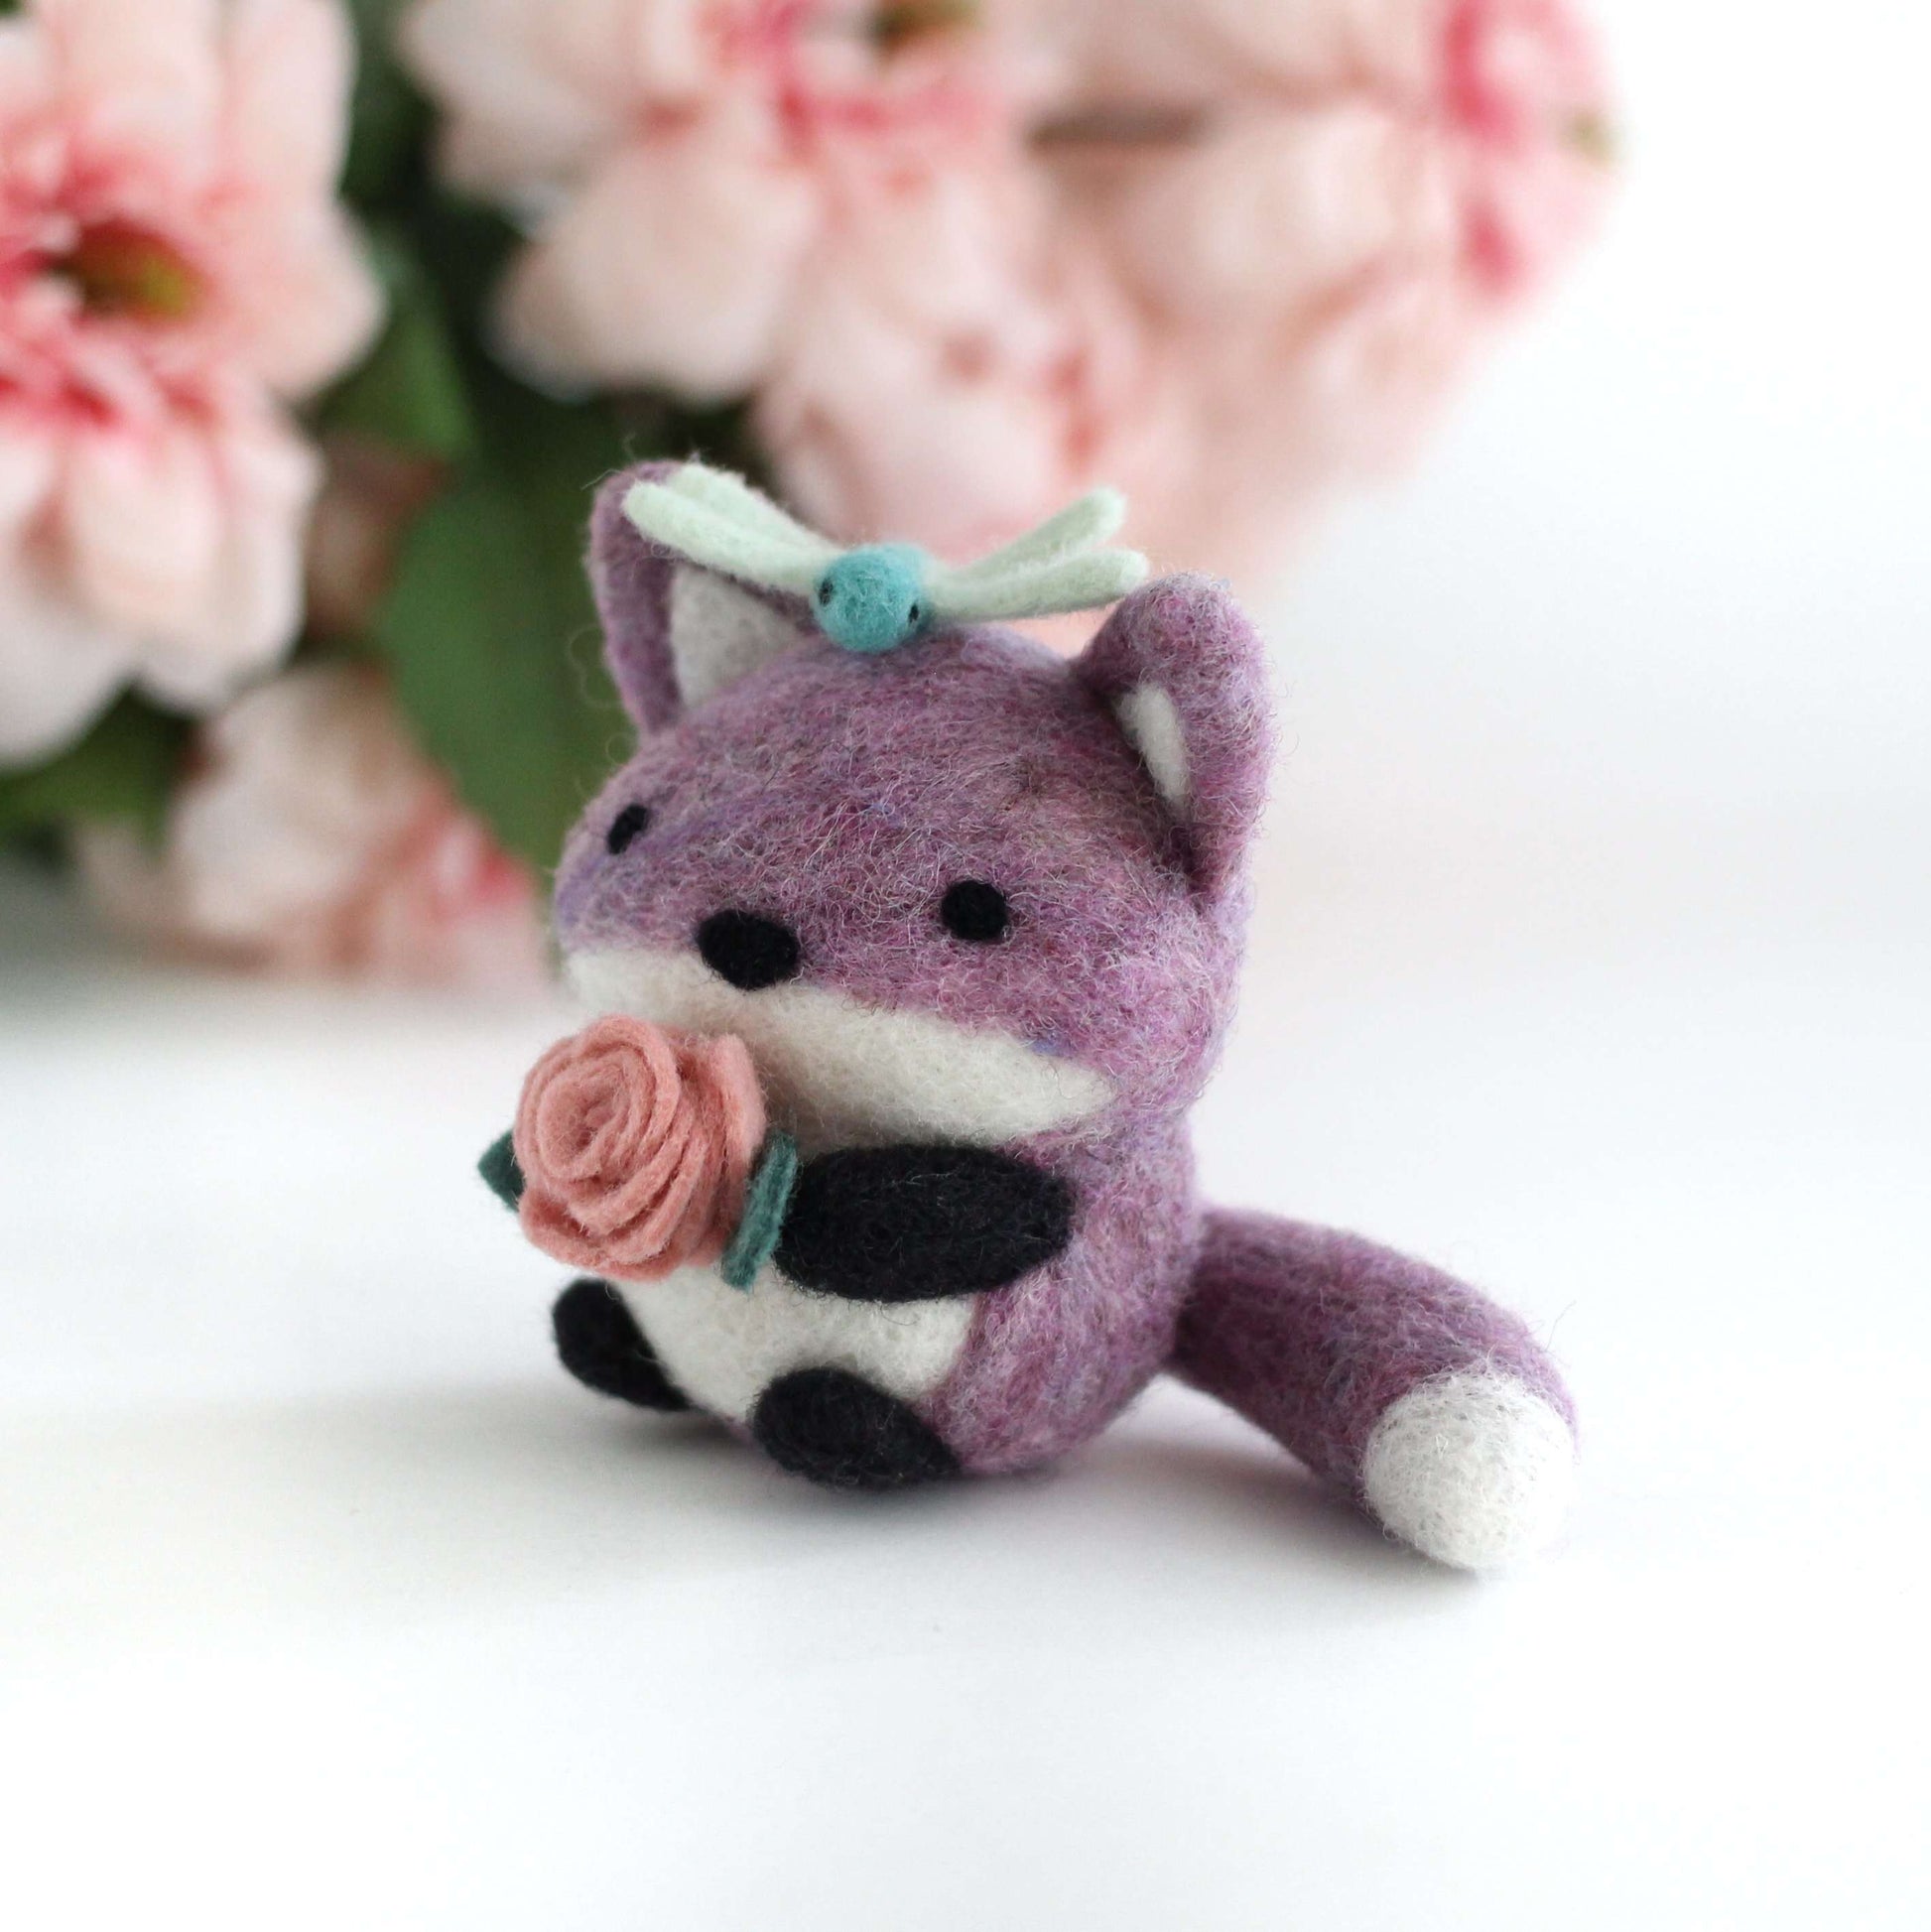 Needle Felted Purple Fox with Dragonfly Friend and Rose by Wild Whimsy Woolies